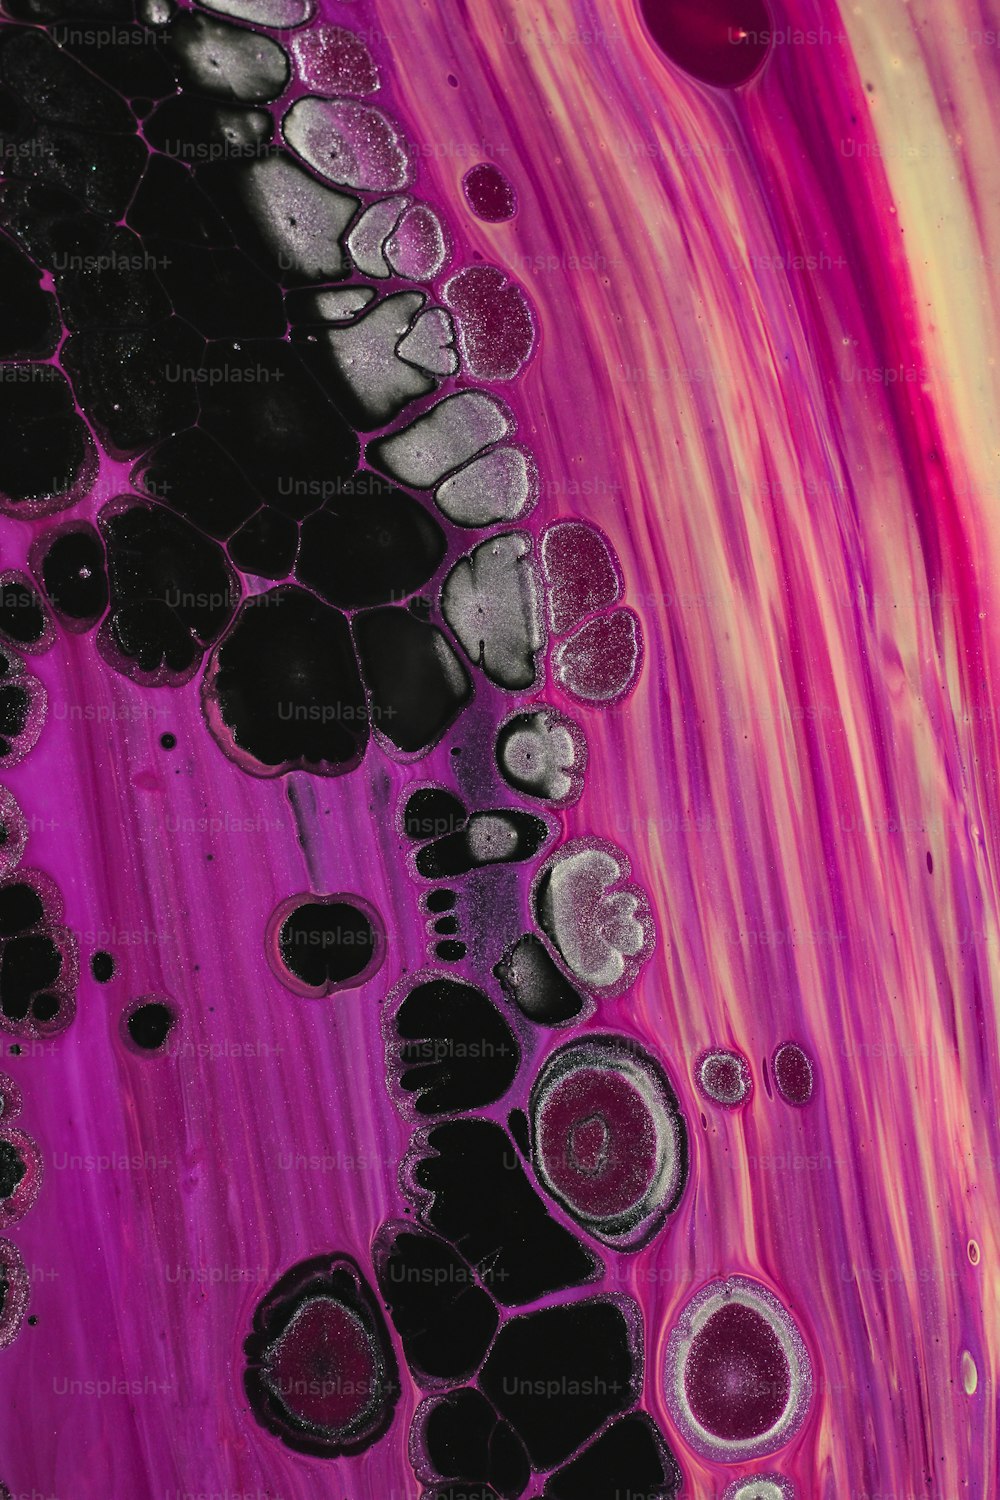 a close up of a purple and black substance